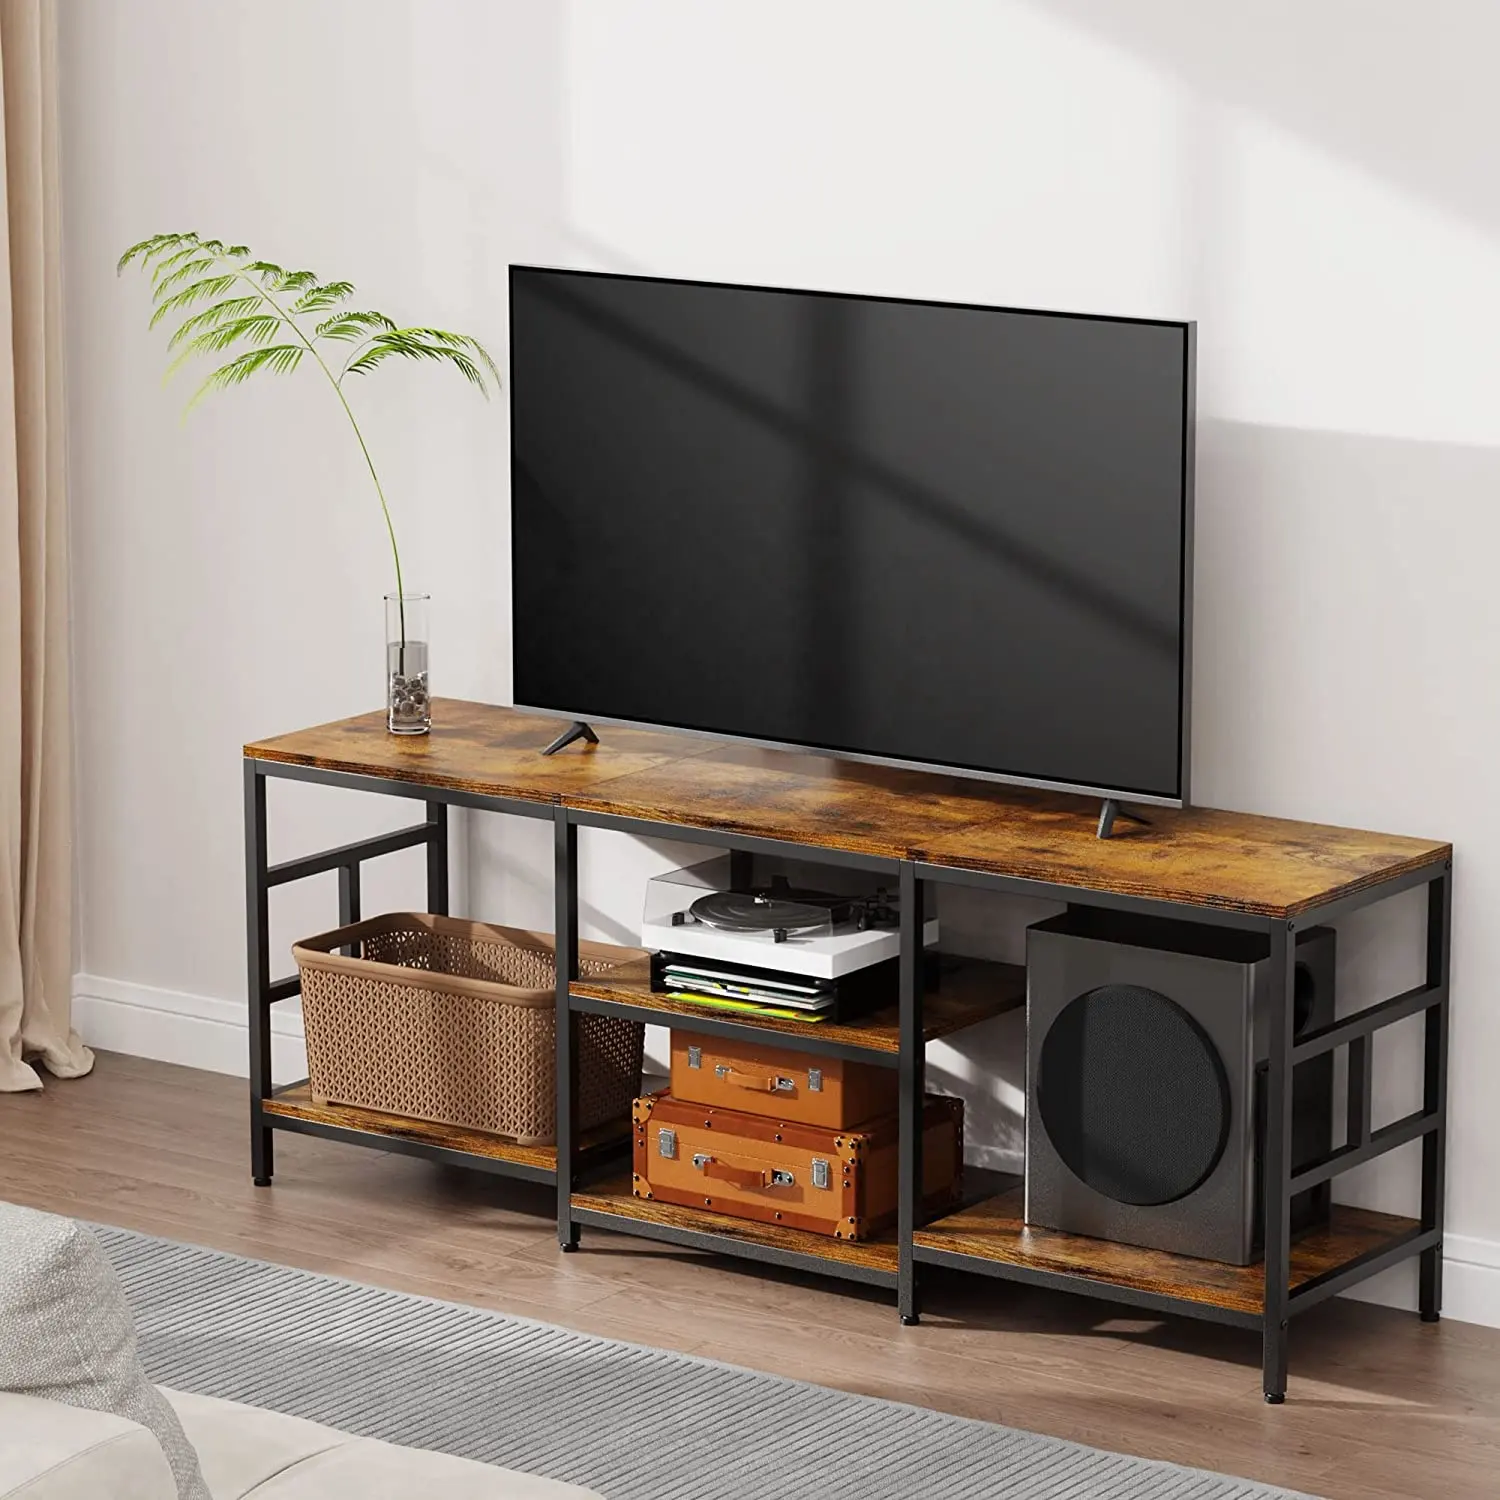 Modern Style Antique TV Display Stand Wooden Console Table Rack & Cabinet Home Furniture LED Feature Living Room Bedroom Storage